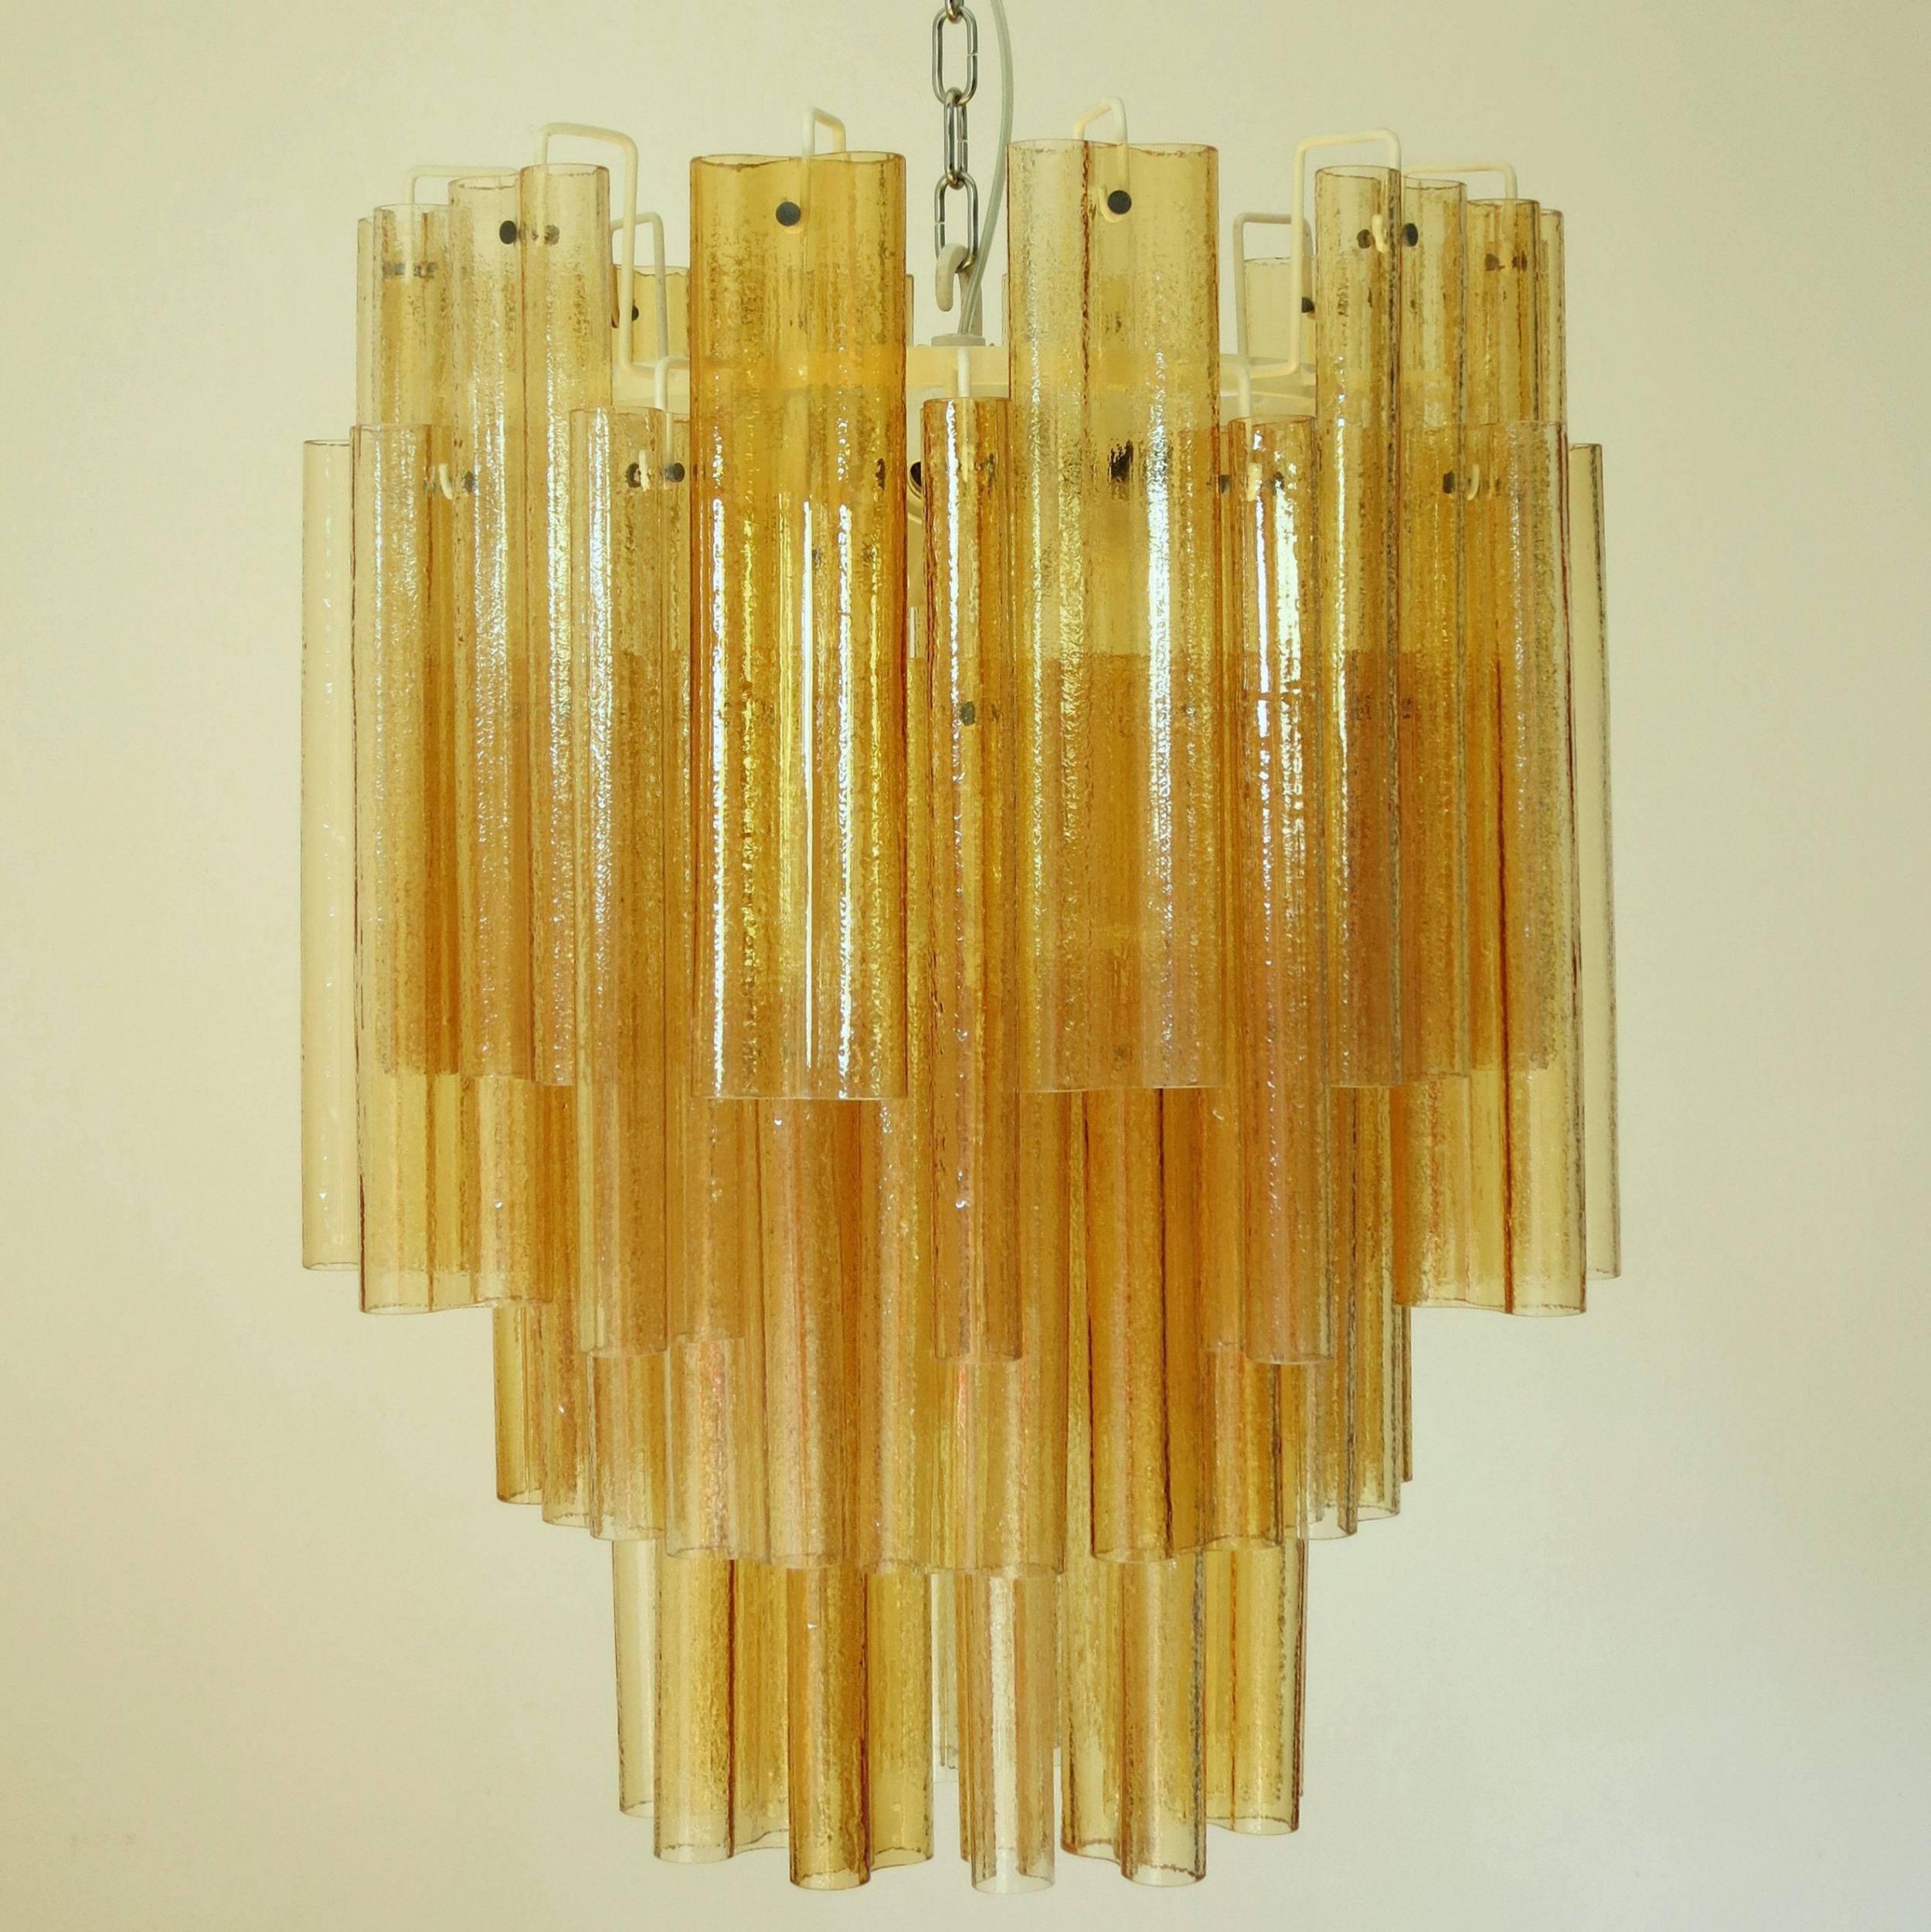 Original Italian vintage chandelier with hand blown amber Murano glass tubes, mounted on painted white metal frame / Attributed to Venini circa 1960s / Made in Italy.